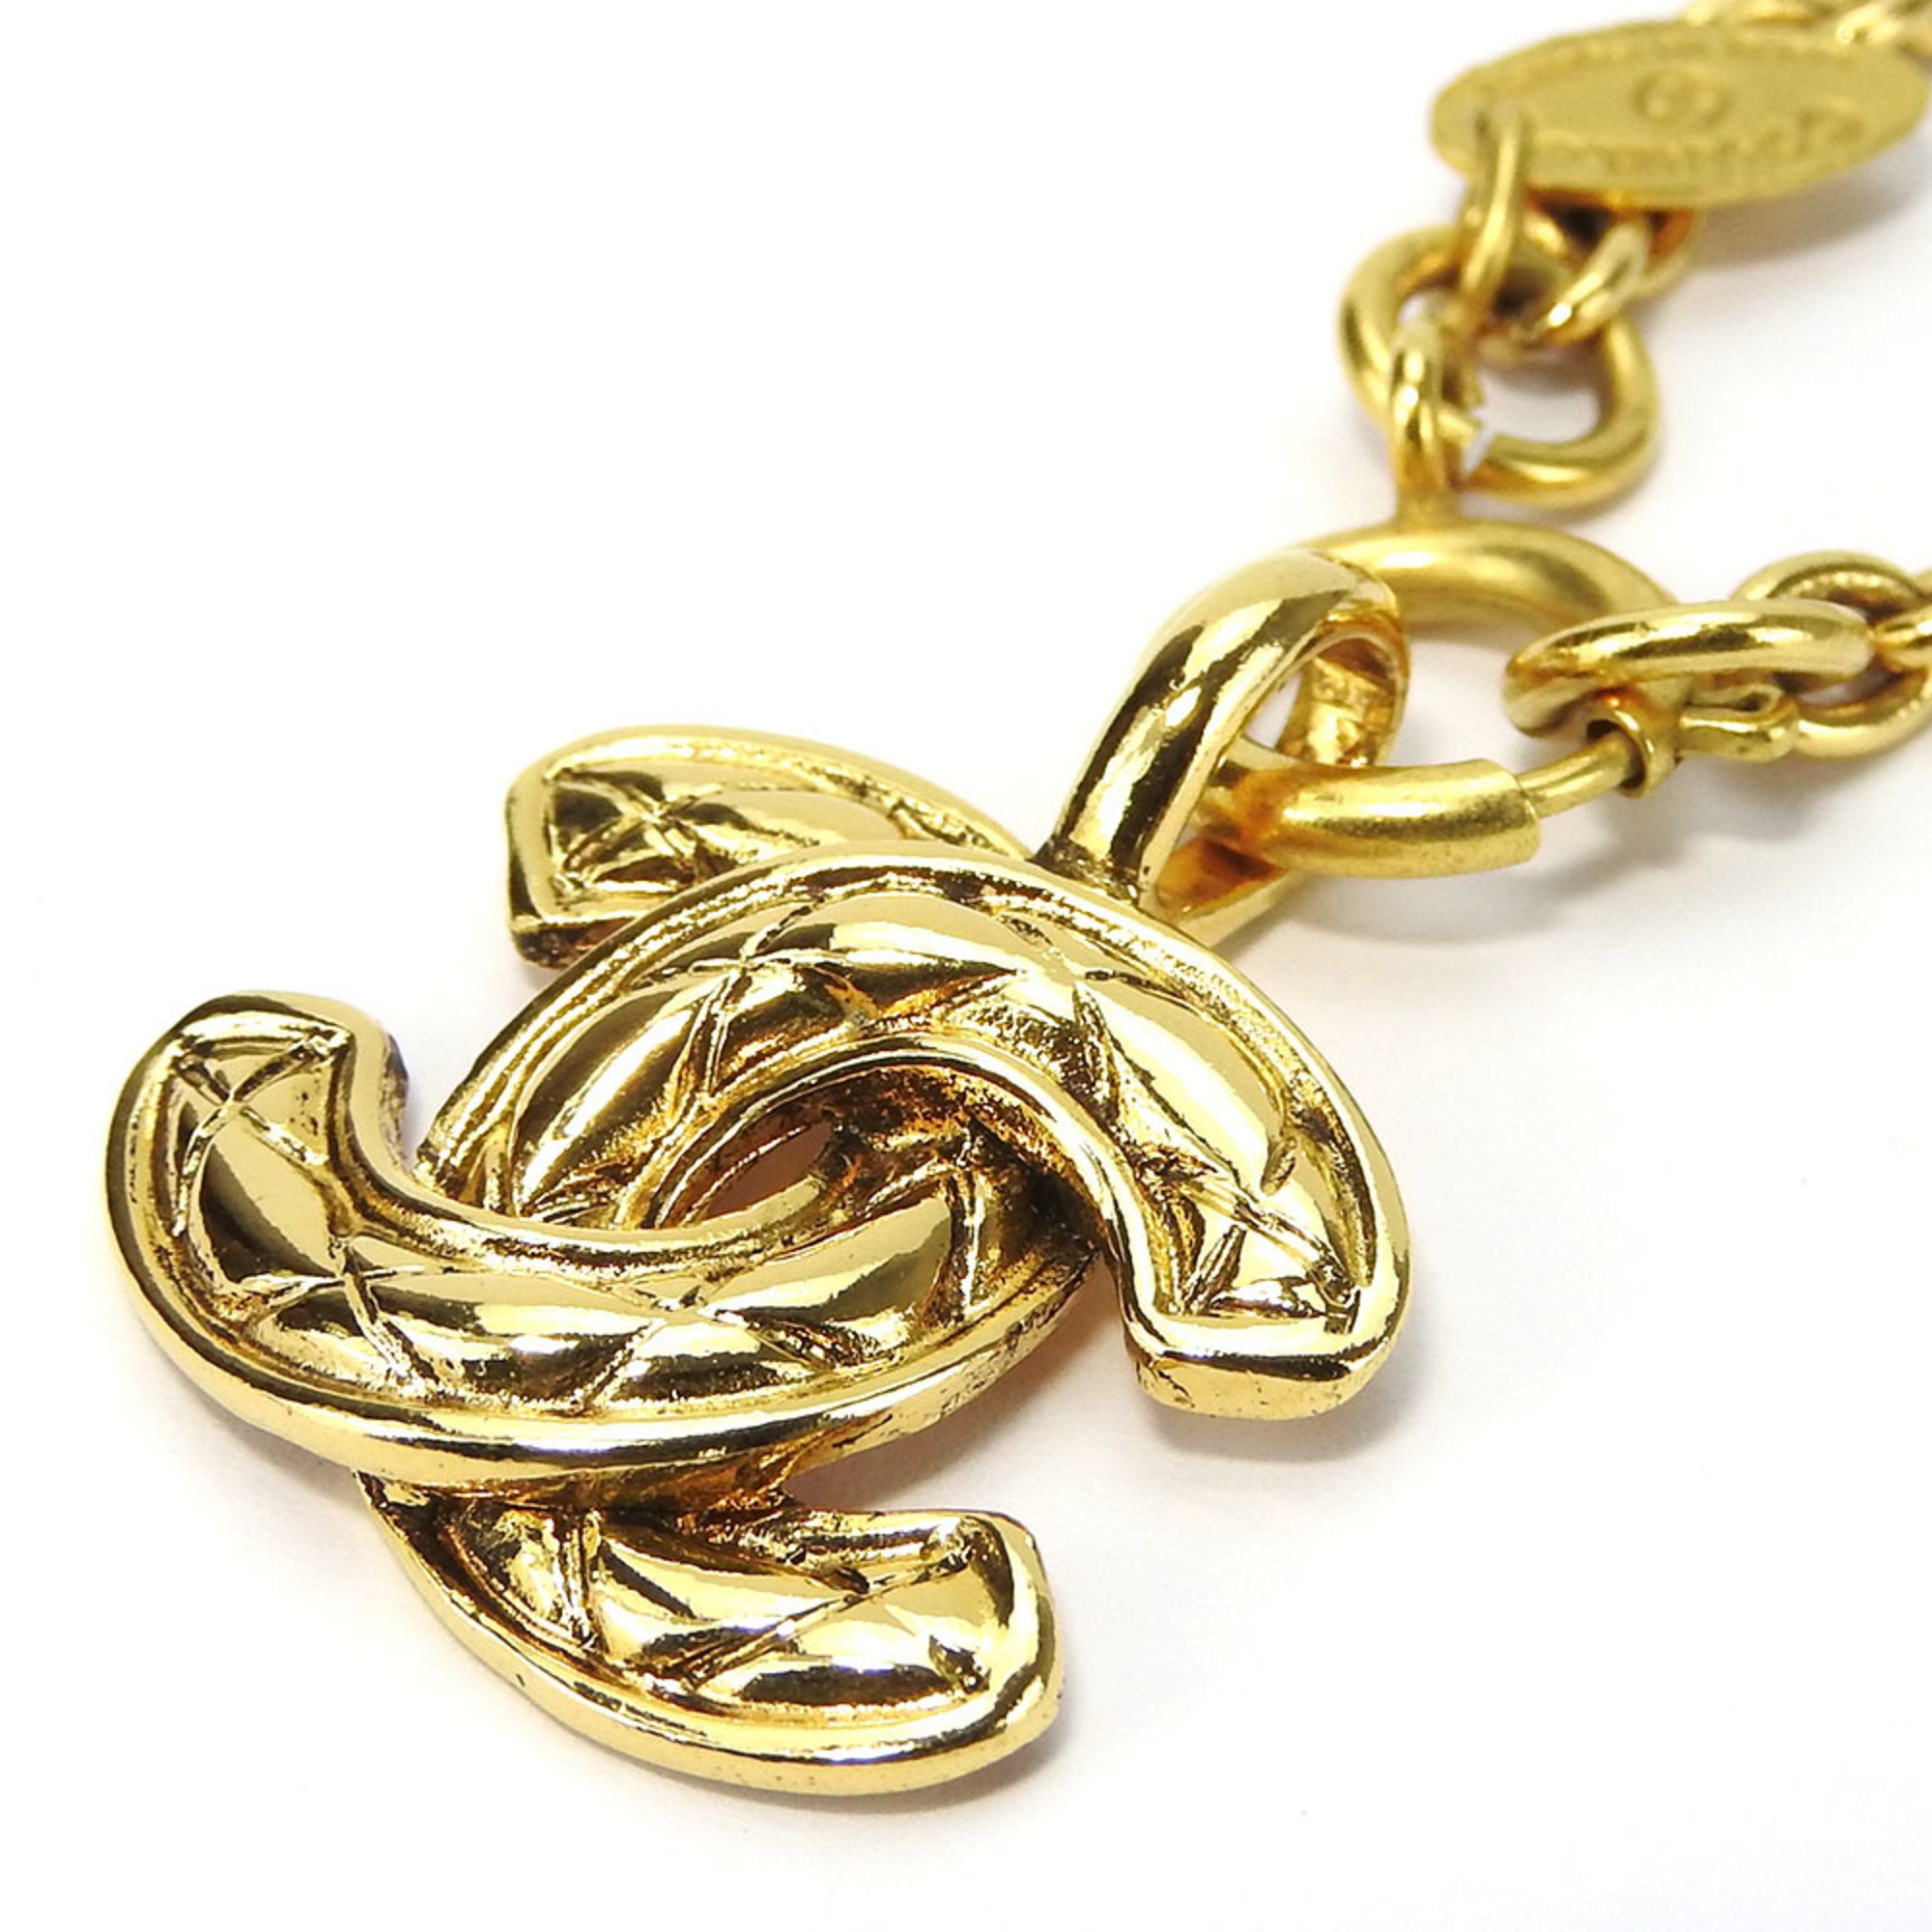 CHANEL Necklace Metal Gold GP Coco Mark Women's